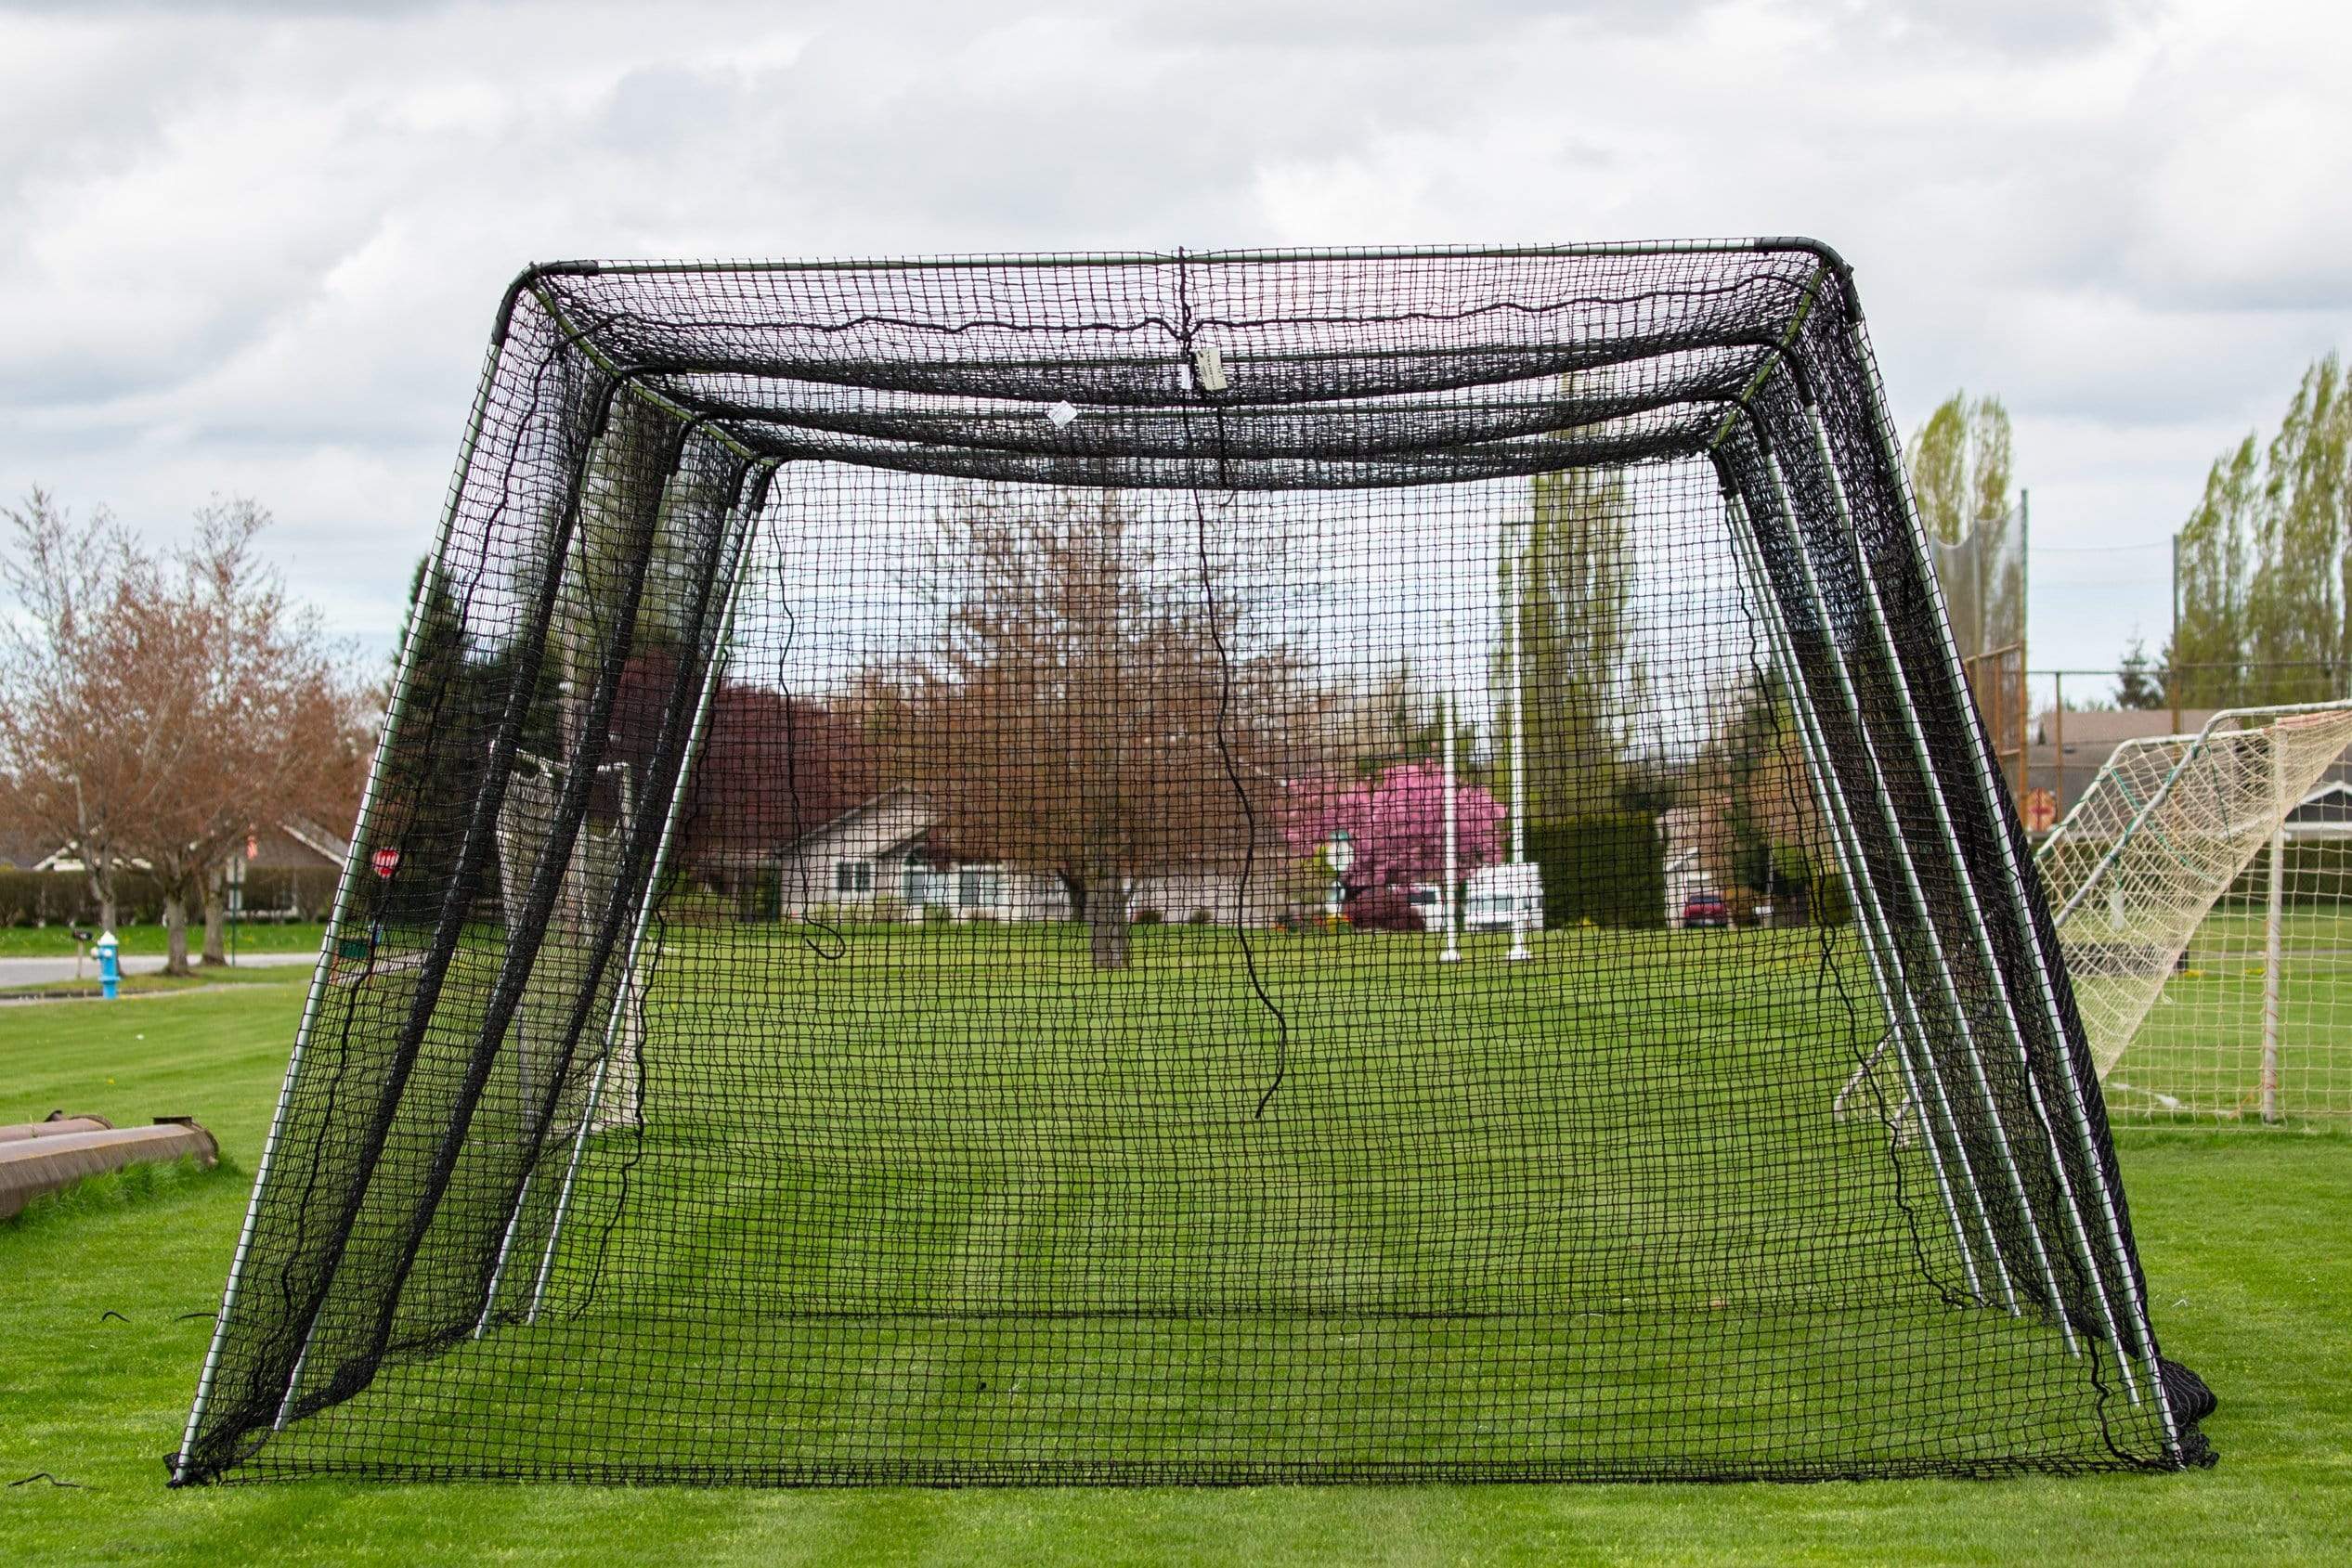 Freestanding Trapezoid Batting Cage on field grass